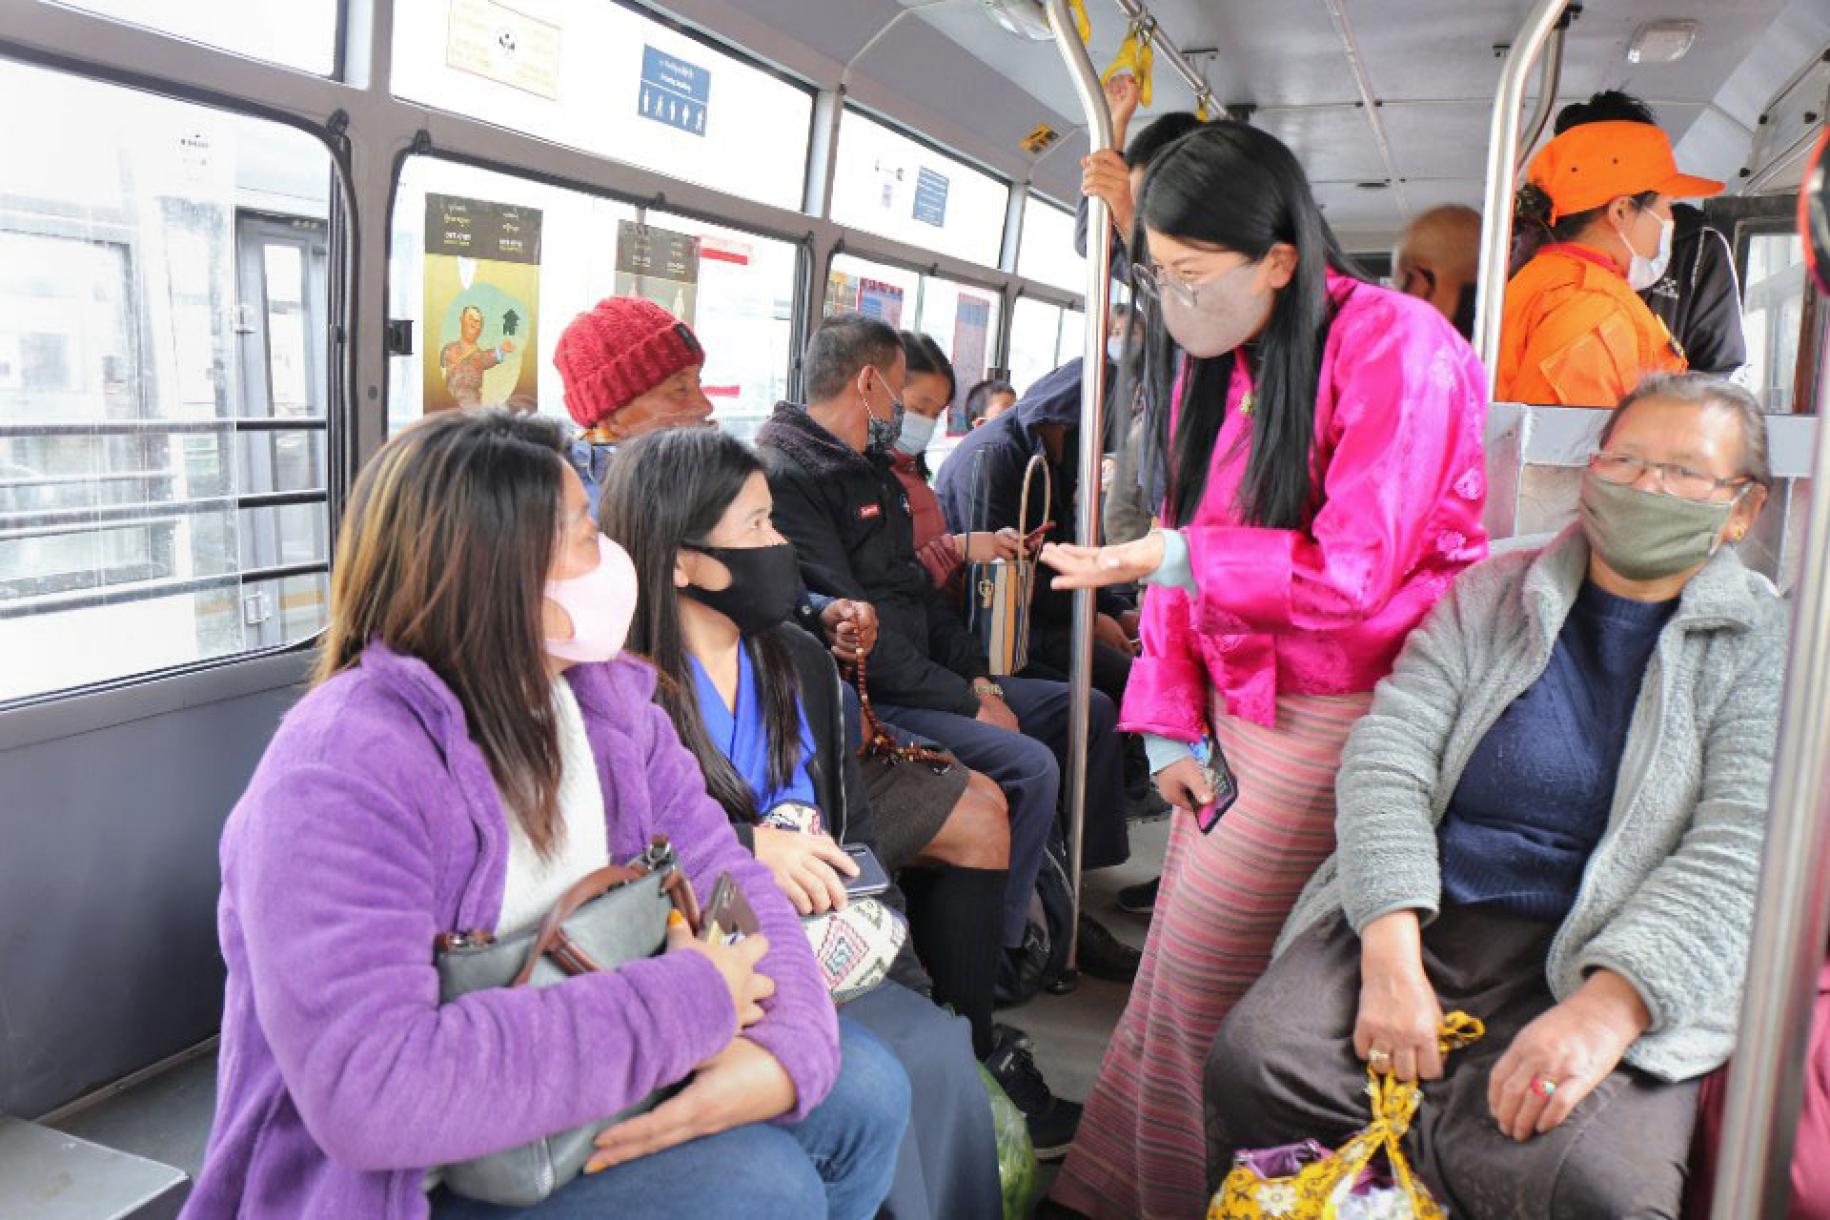 Several people in bright colors wearing masks ride on a bus.